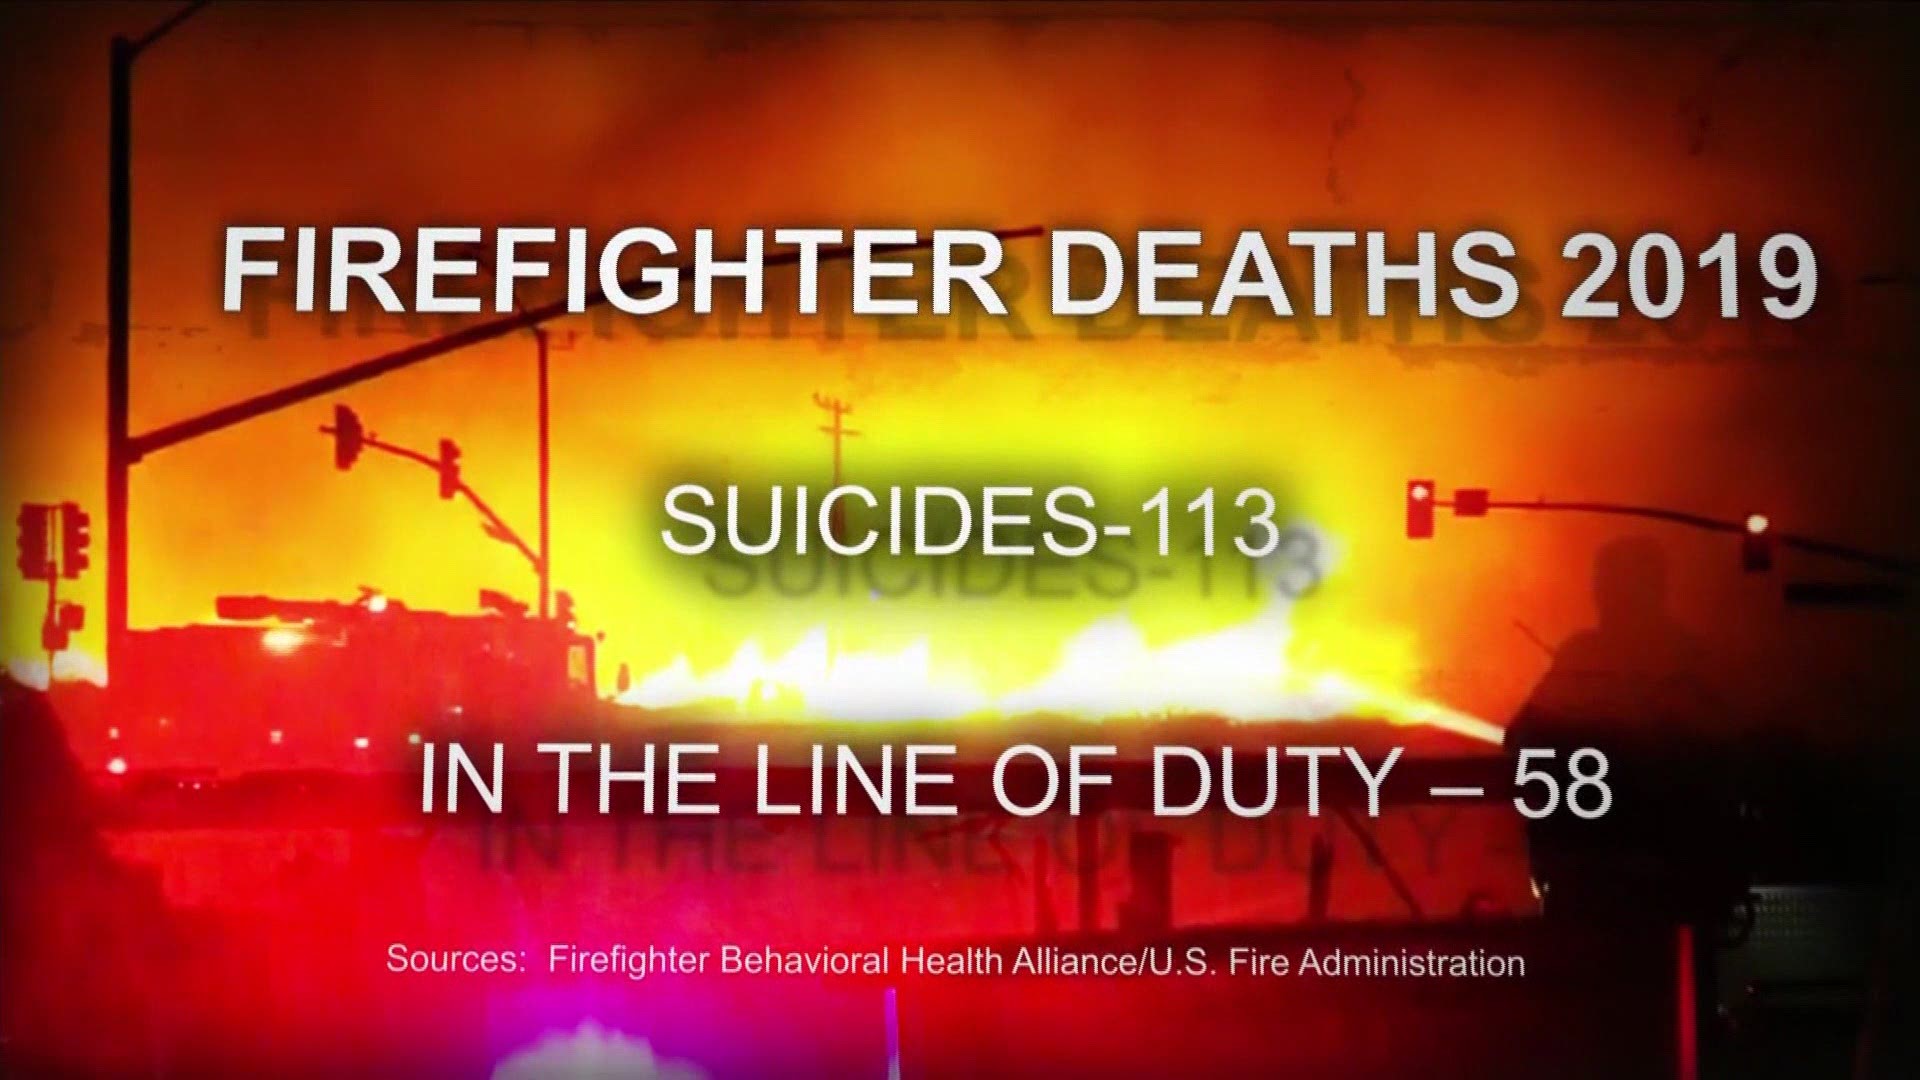 Last year, firefighter suicides nearly doubled the number of firefighters that died battling flames.